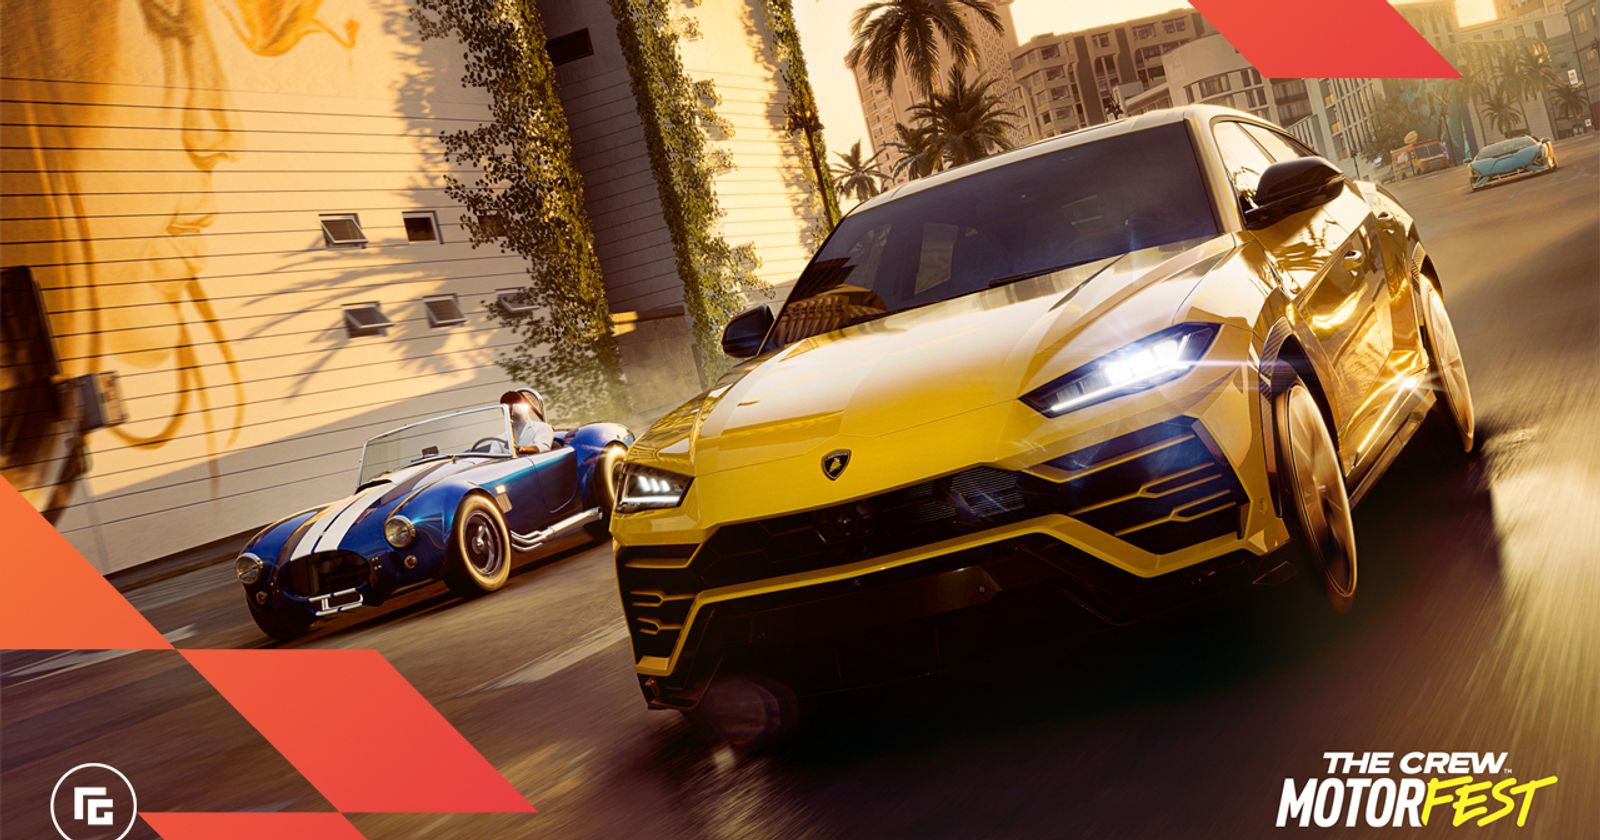 Is The Crew Motorfest on Game Pass? How to Get the Game Pass for The Crew  Motorfest? - News